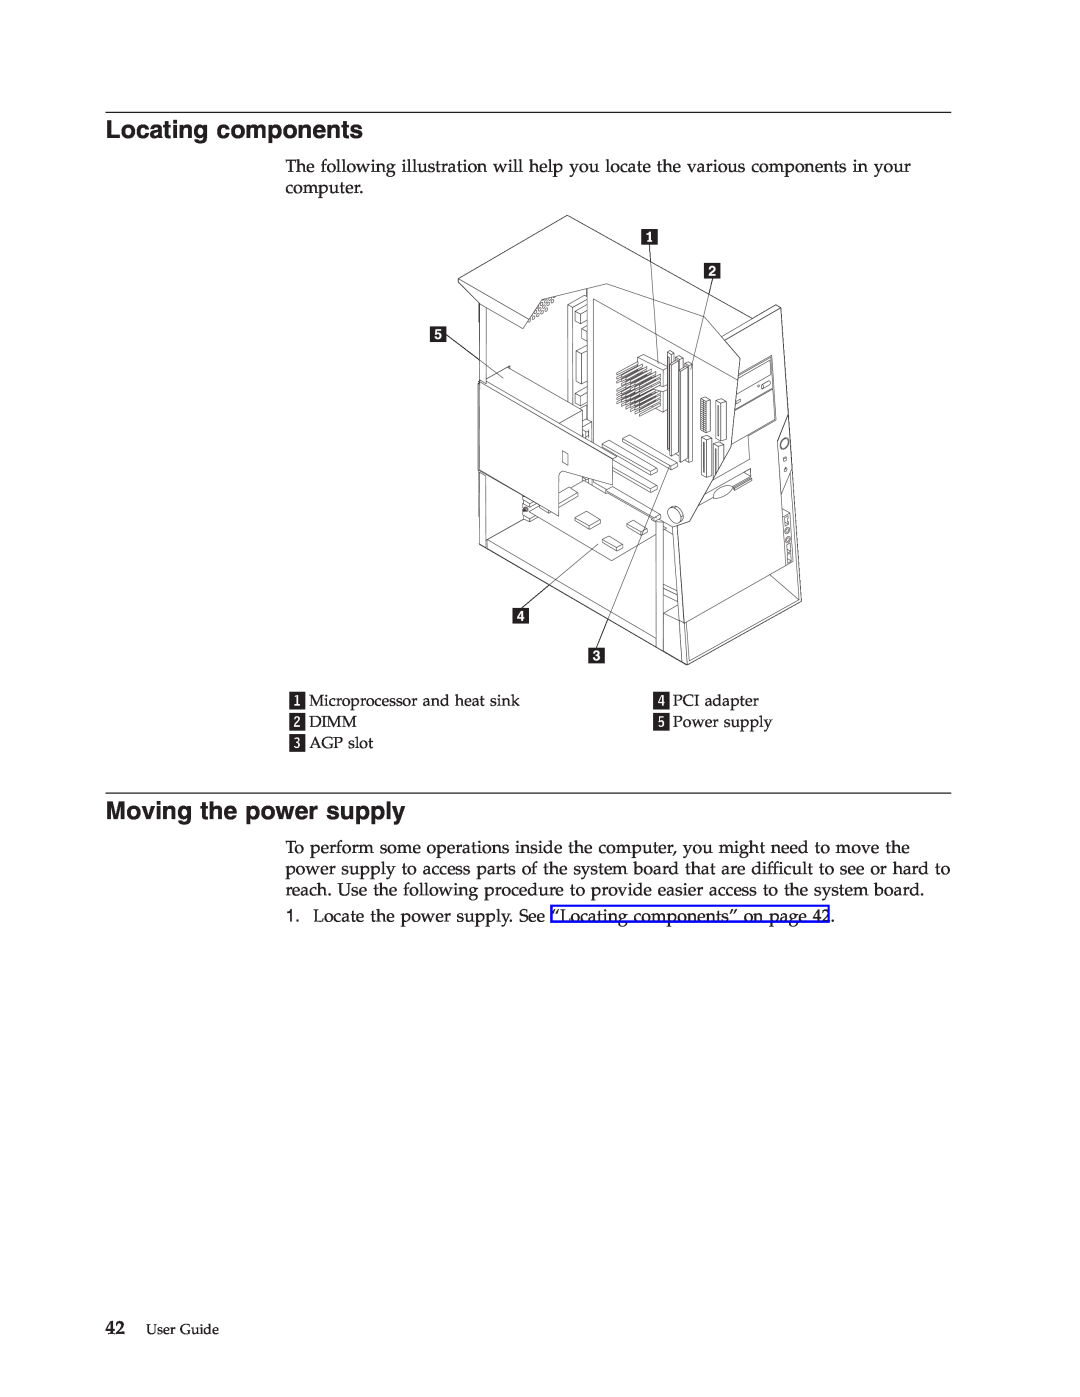 IBM Partner Pavilion 6795, 6343, 6793, 6349, 6791, 6790, 6792, 6825 Moving the power supply, Locating components, User Guide 